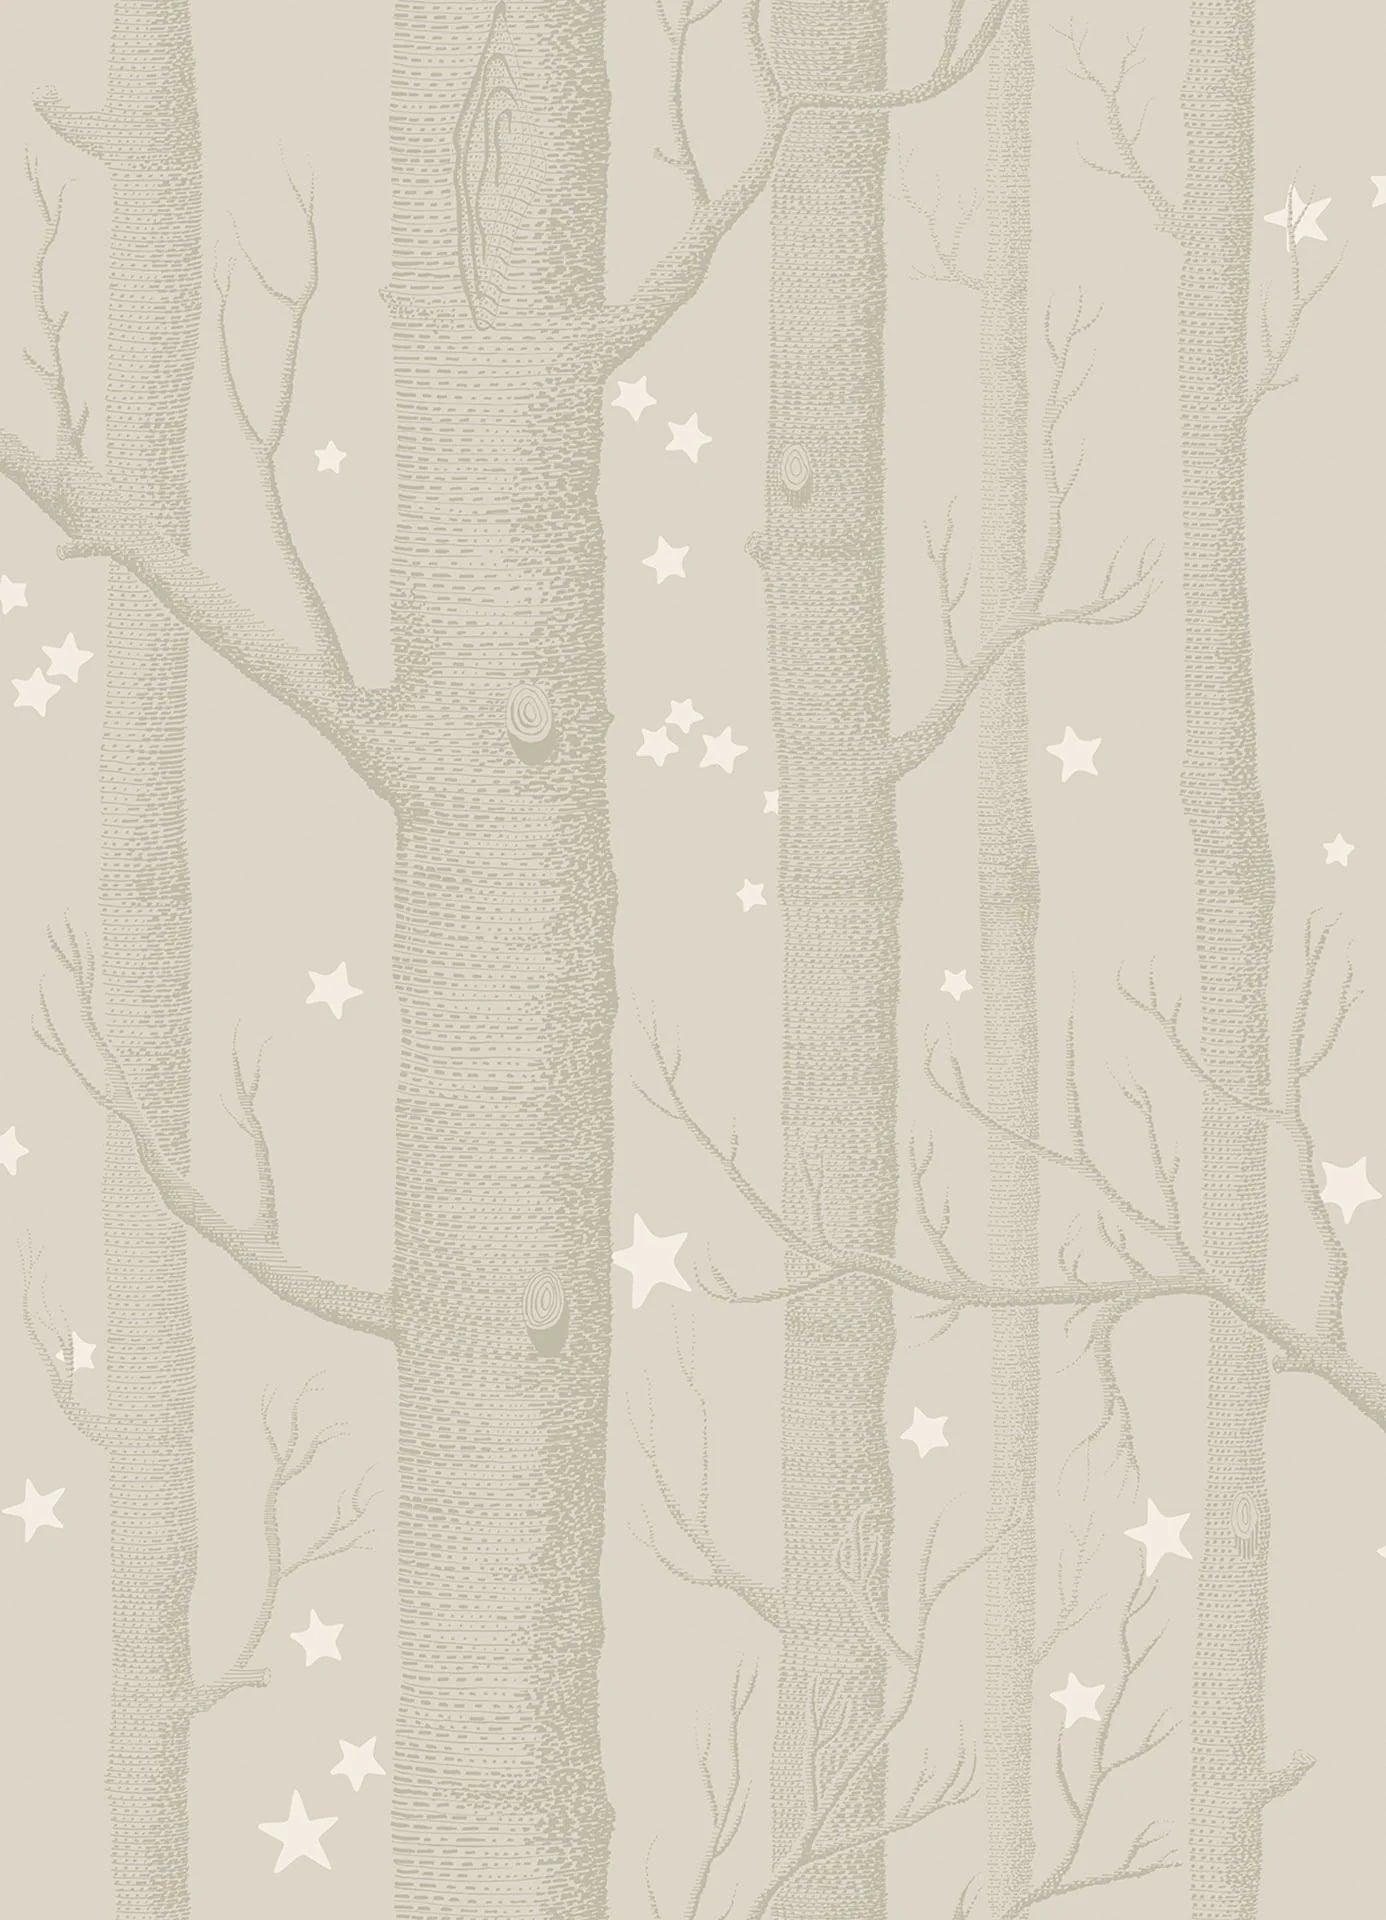 Tapeta WHIMSICAL - Woods & Stars beżowy Cole & Son    Eye on Design